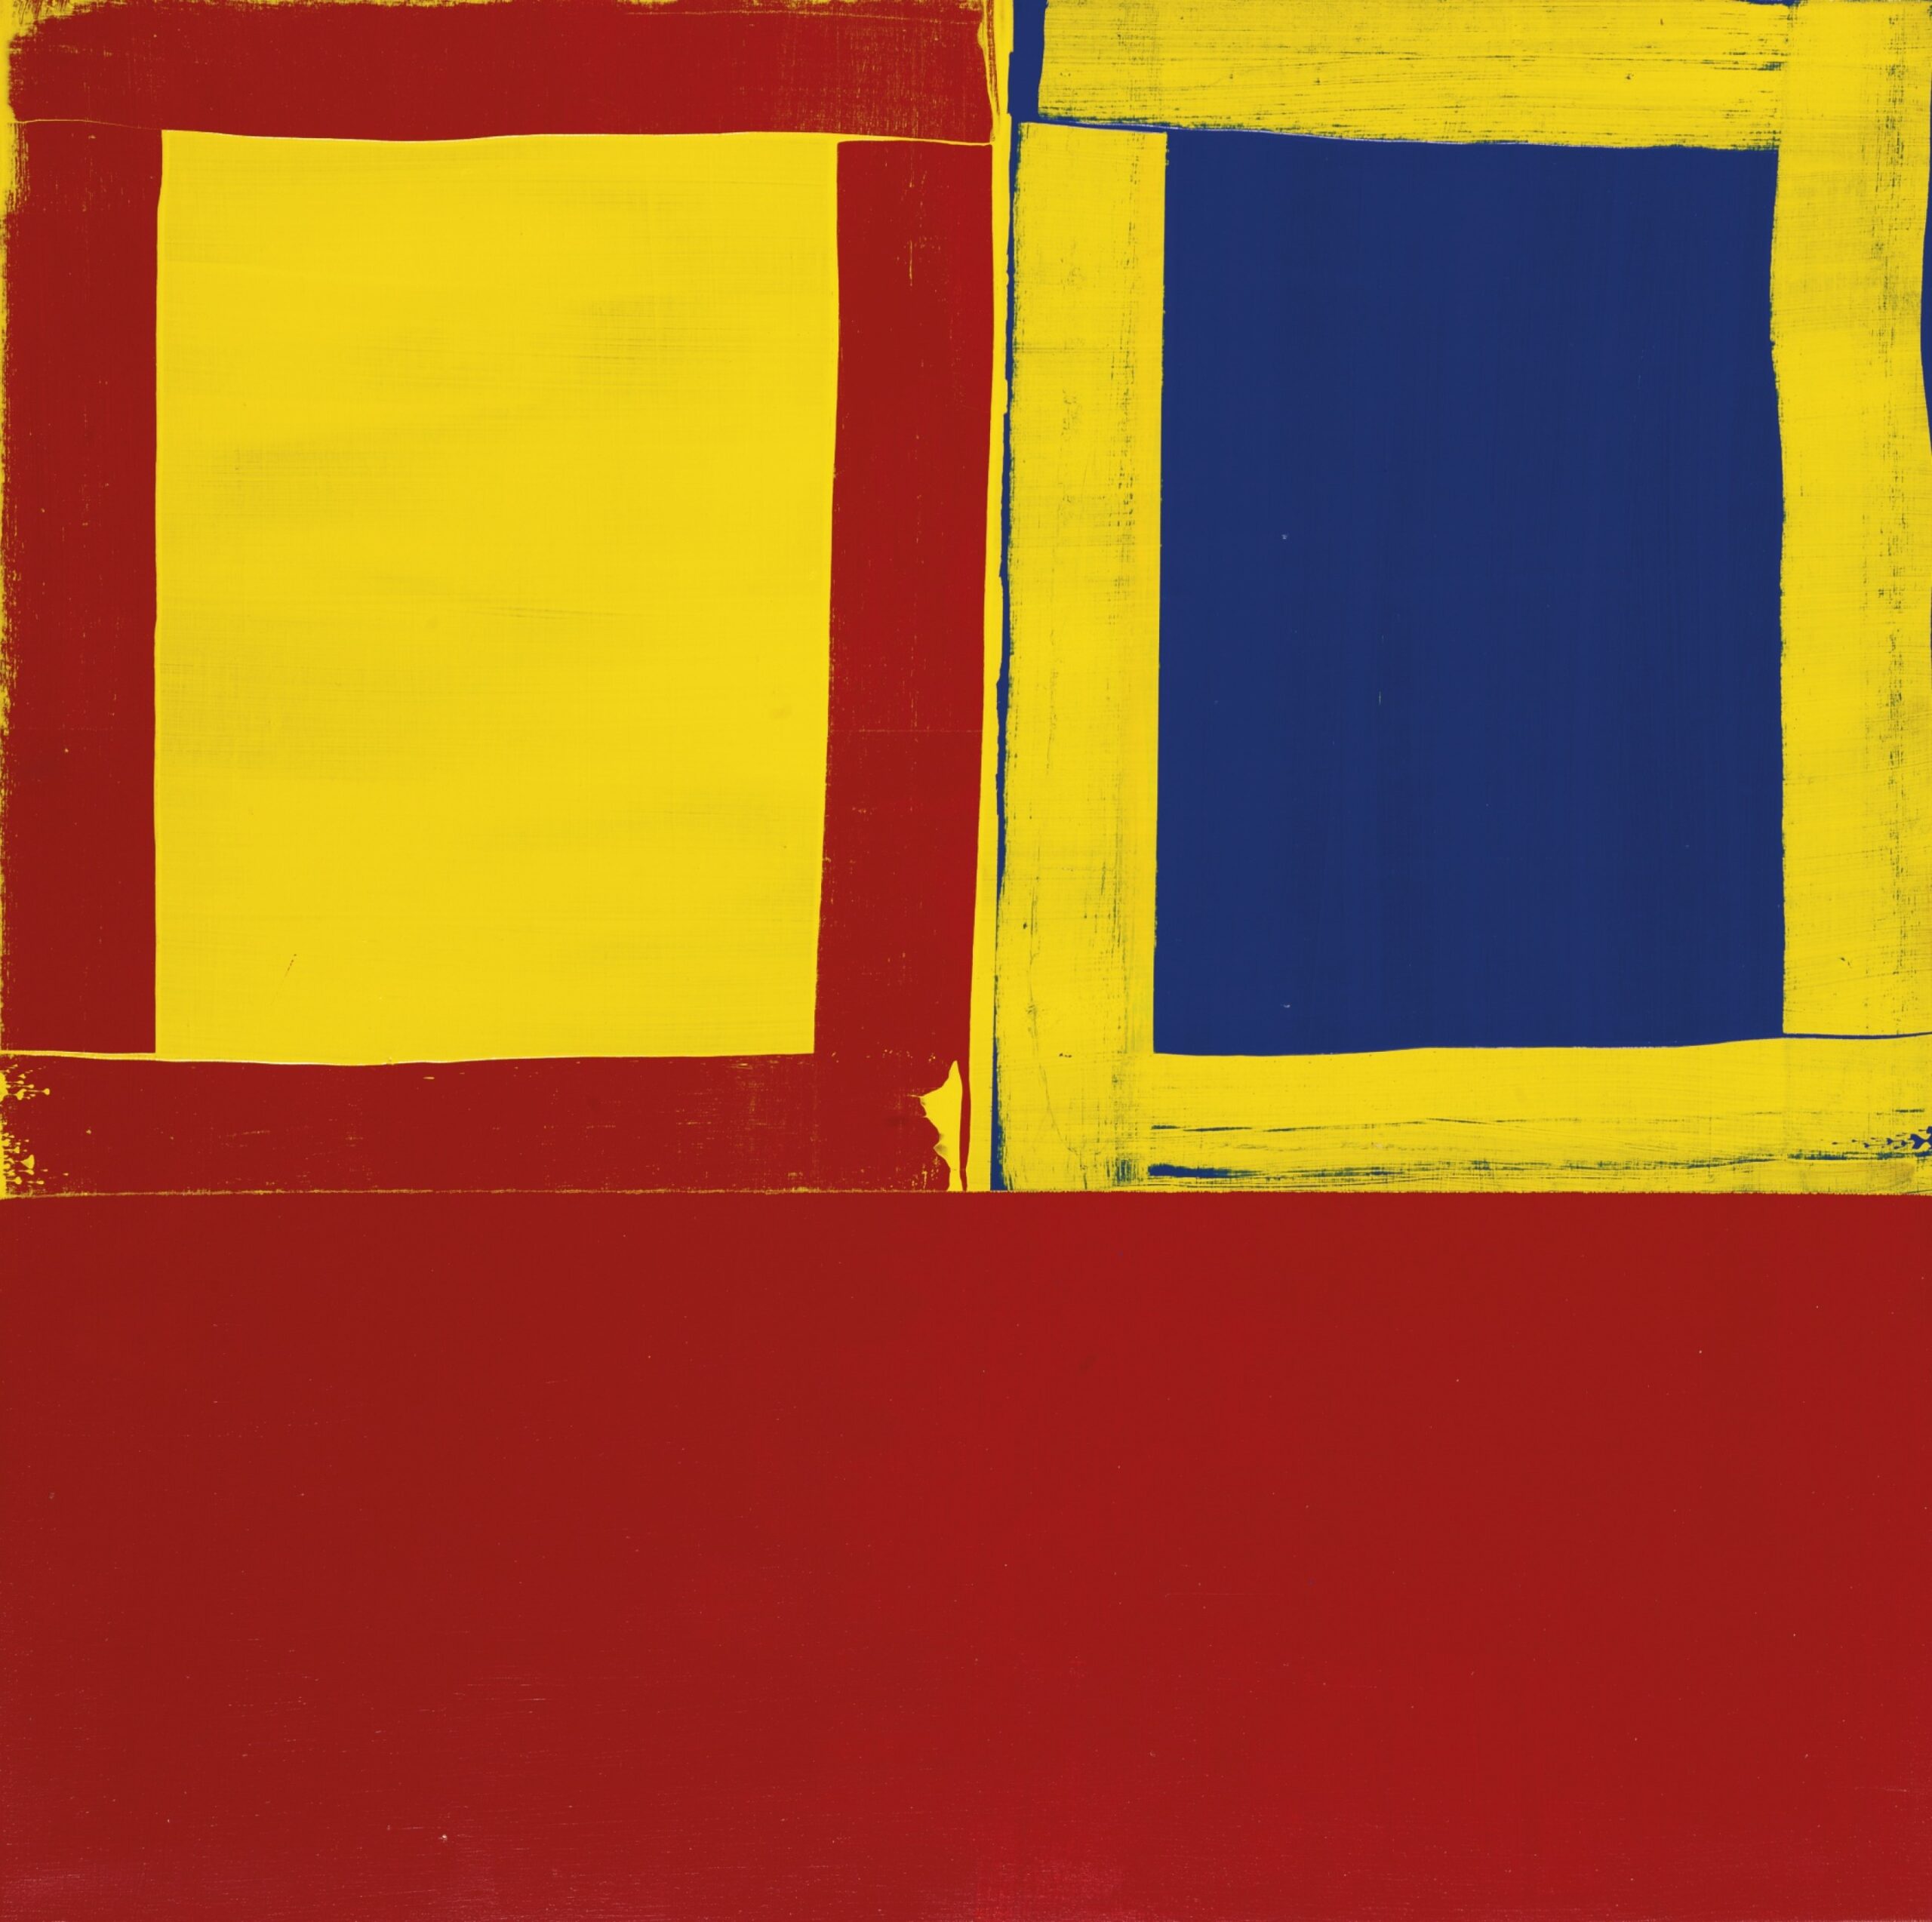 Mary Heilmann, Small Red Yellow and Blue Too, 1976, ©Mary Heilmann